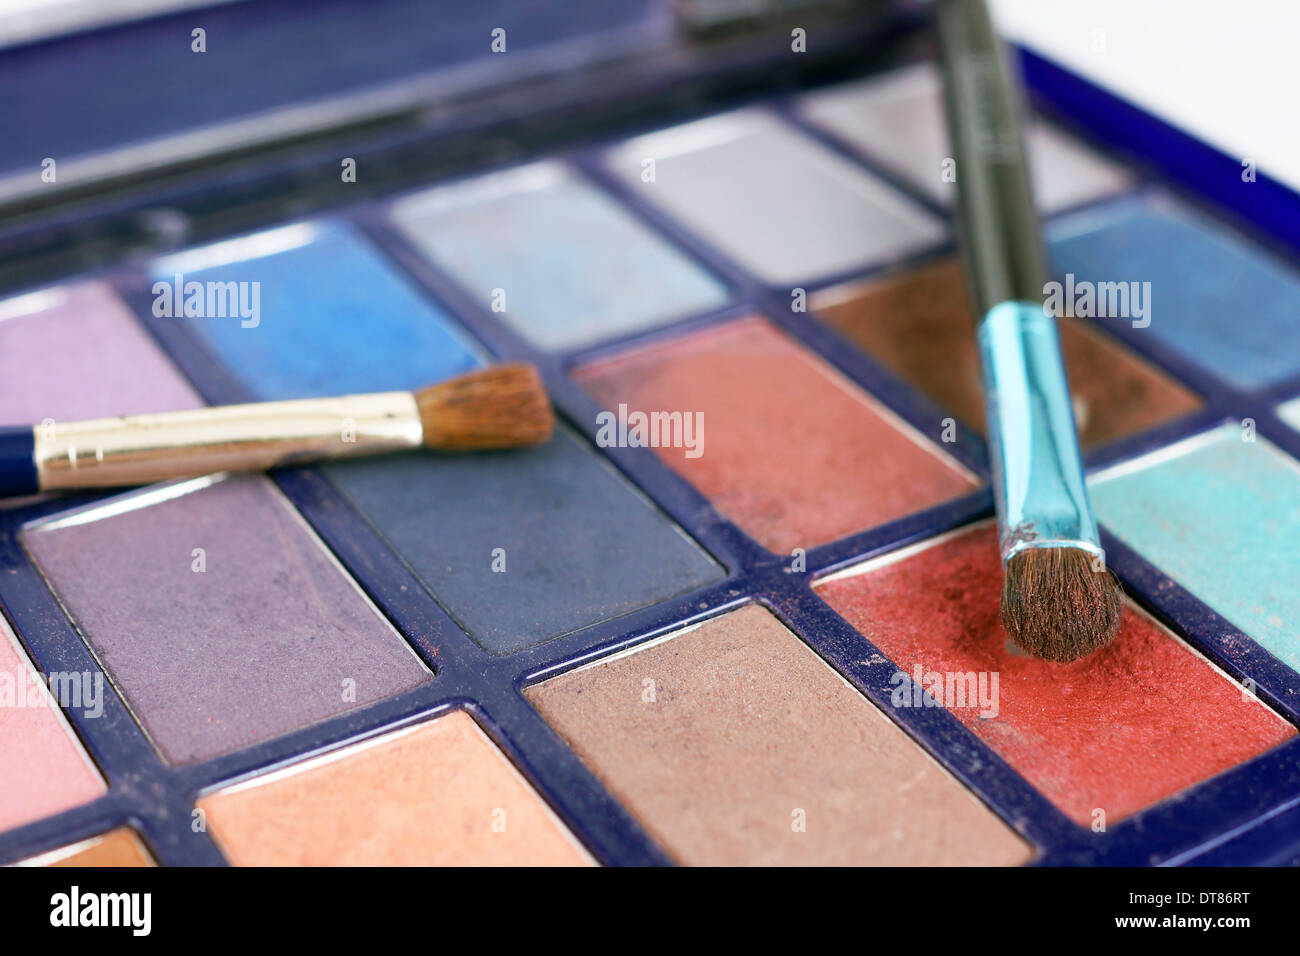 Macro of colorful eye shadow powders and brushes Stock Photo